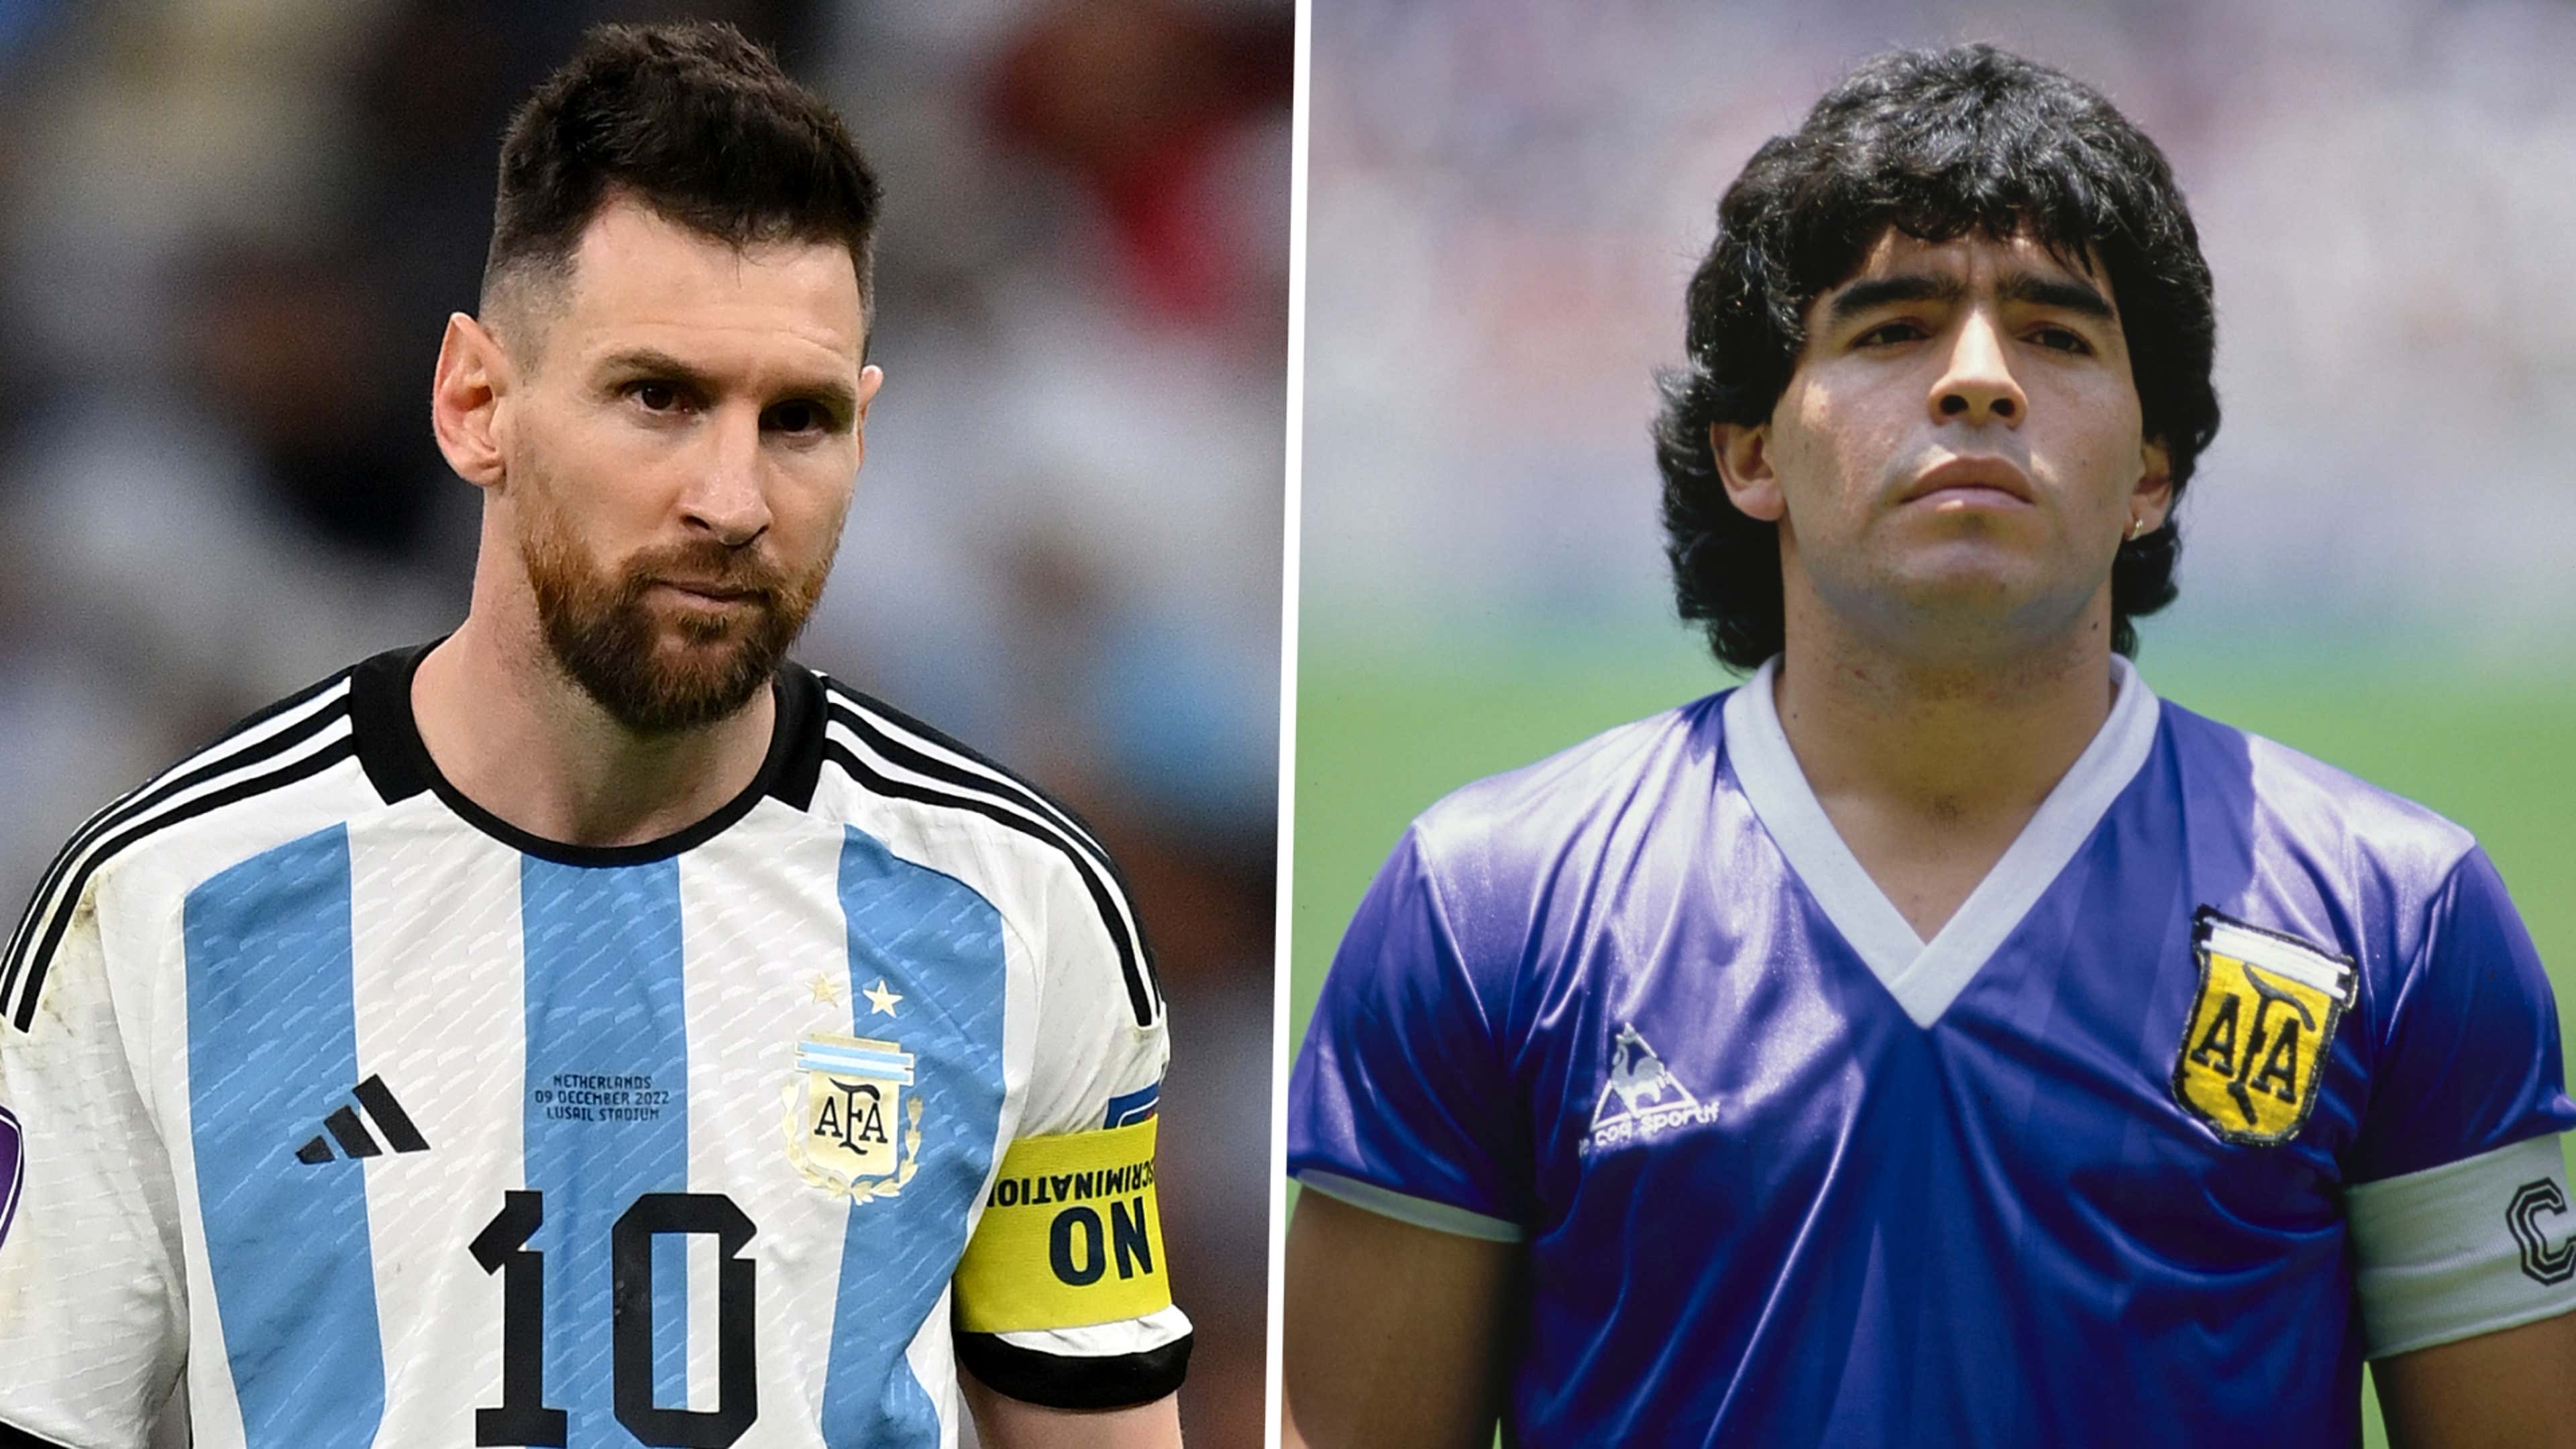 Messi has NOT overtaken Maradona as Argentina's greatest player after World Cup win, insists Zanetti | Goal.com